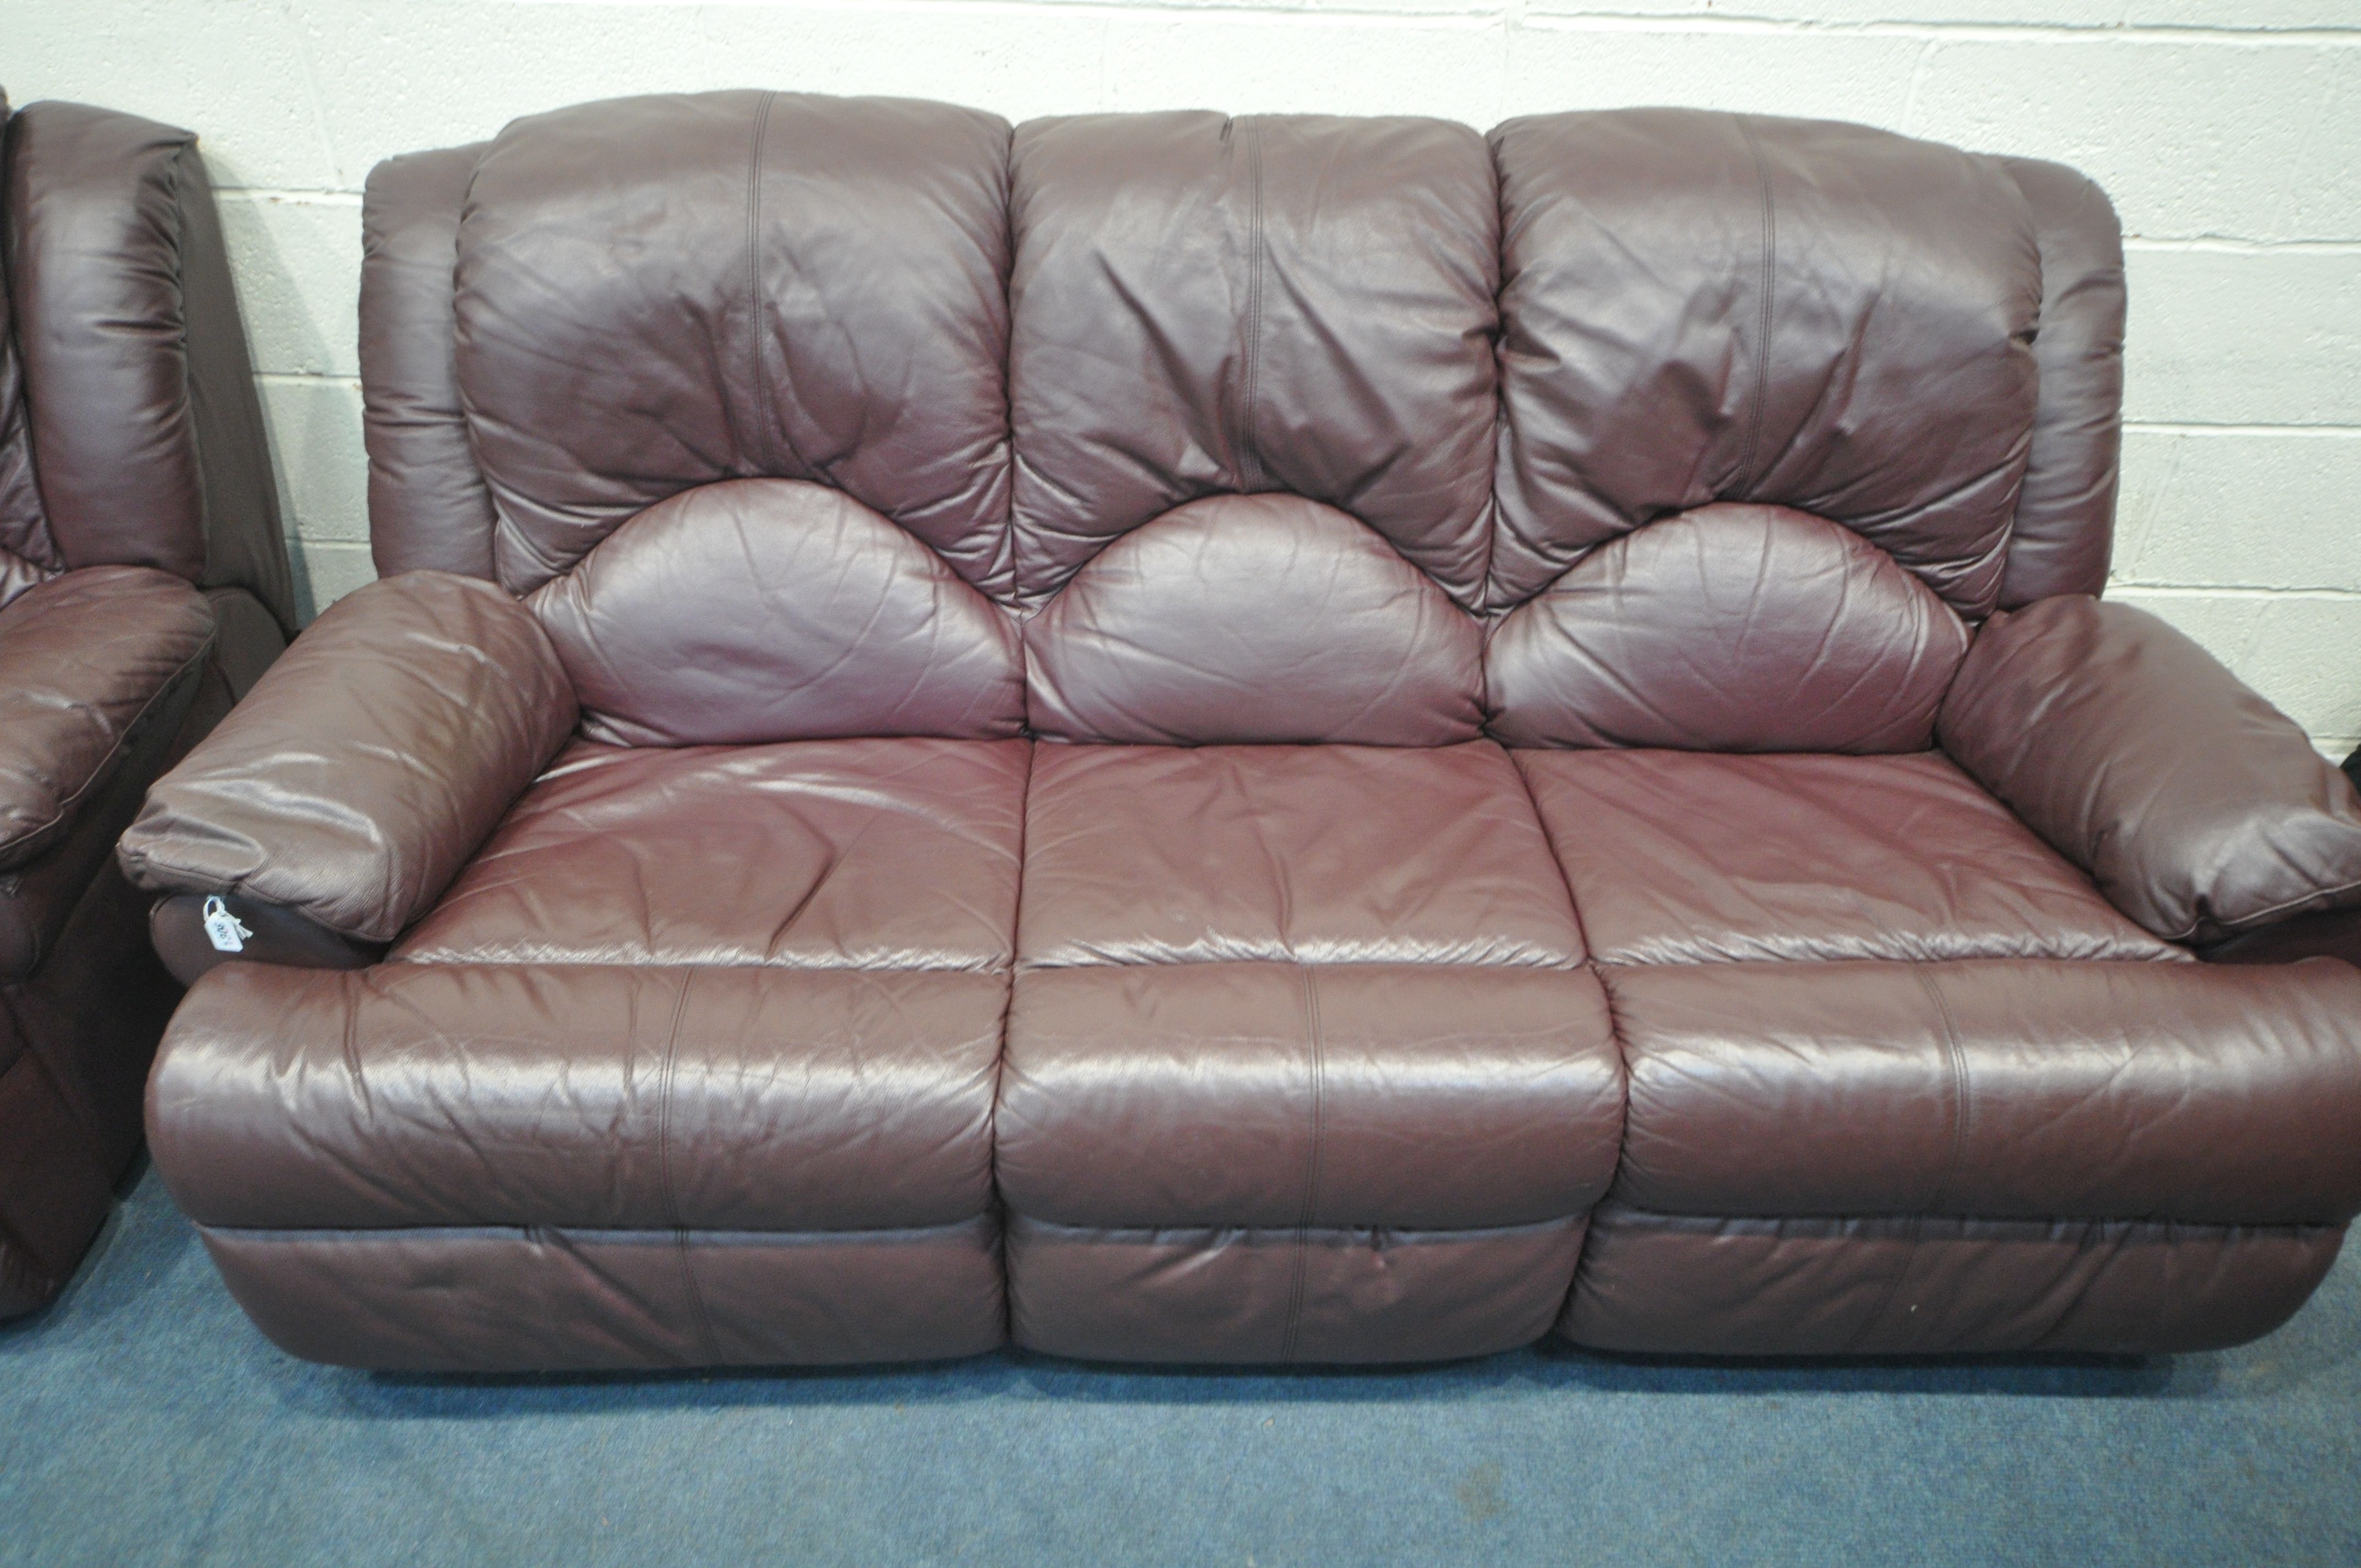 A PLUM LEATHER UPHOLSTERED THREE PIECE LOUNGE SUITE, comprising a three seater sofa, length 203cm - Image 2 of 4